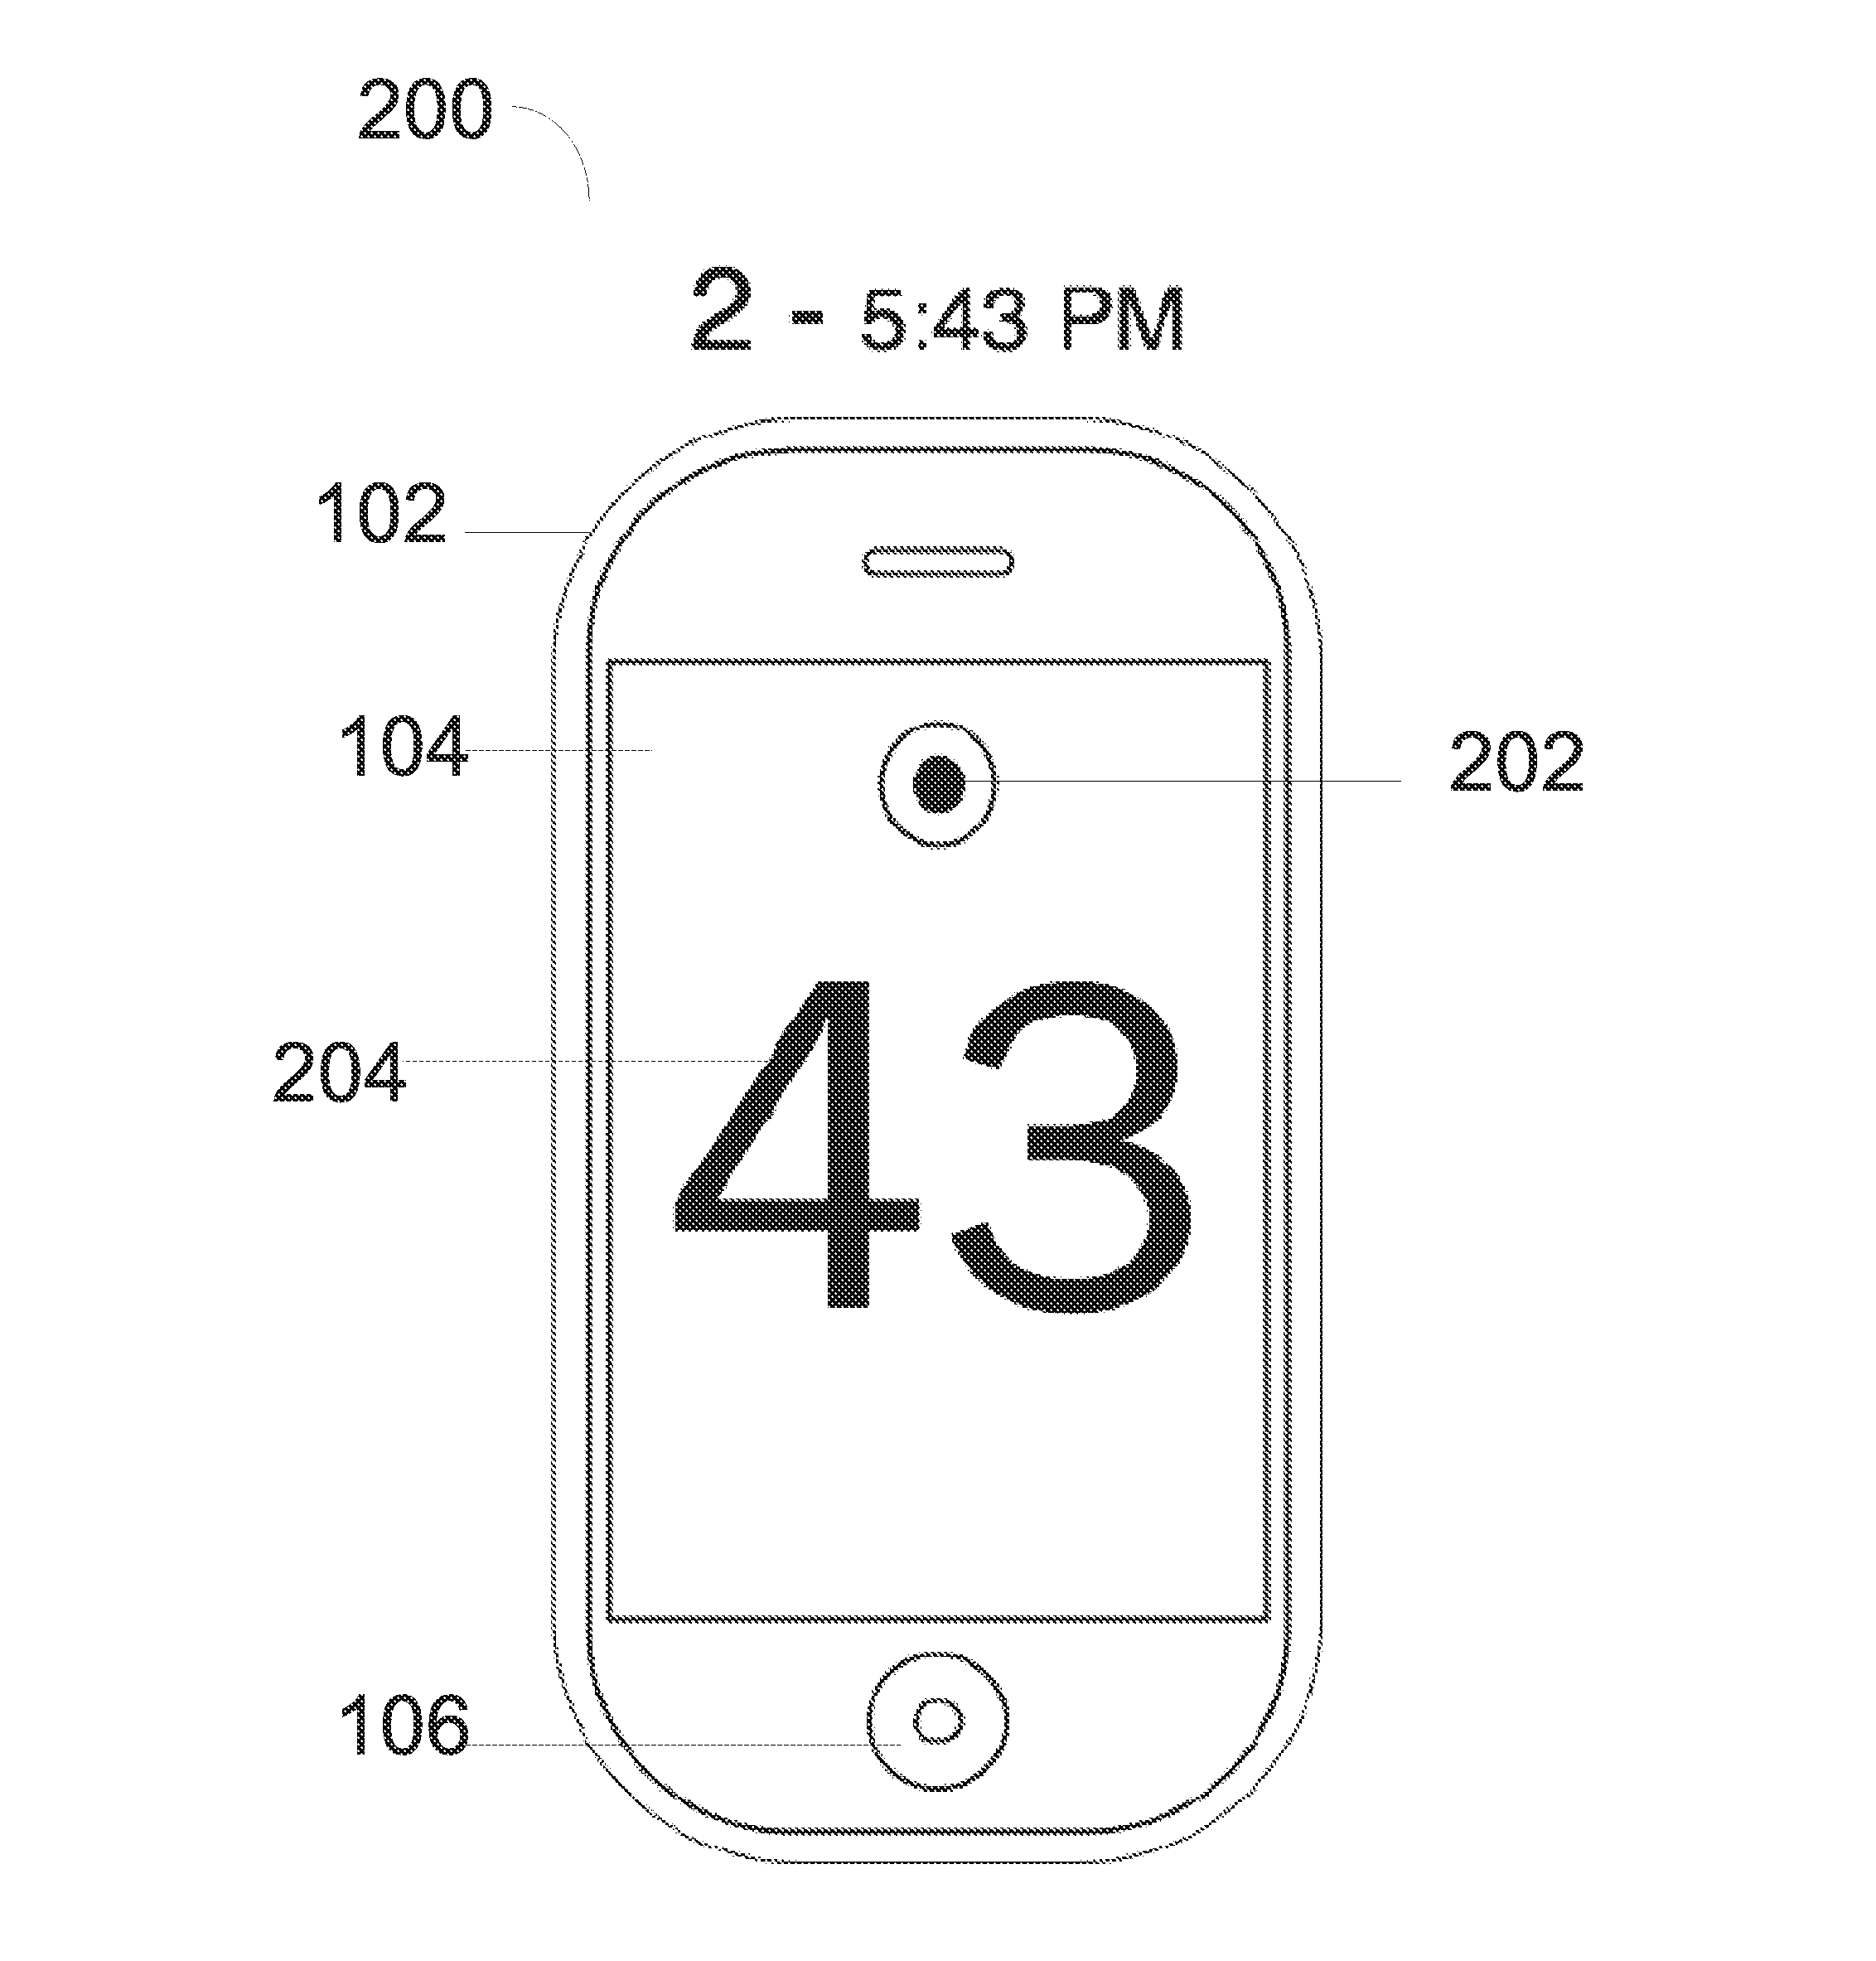 Method and device for tactilely reading time on a touch screen